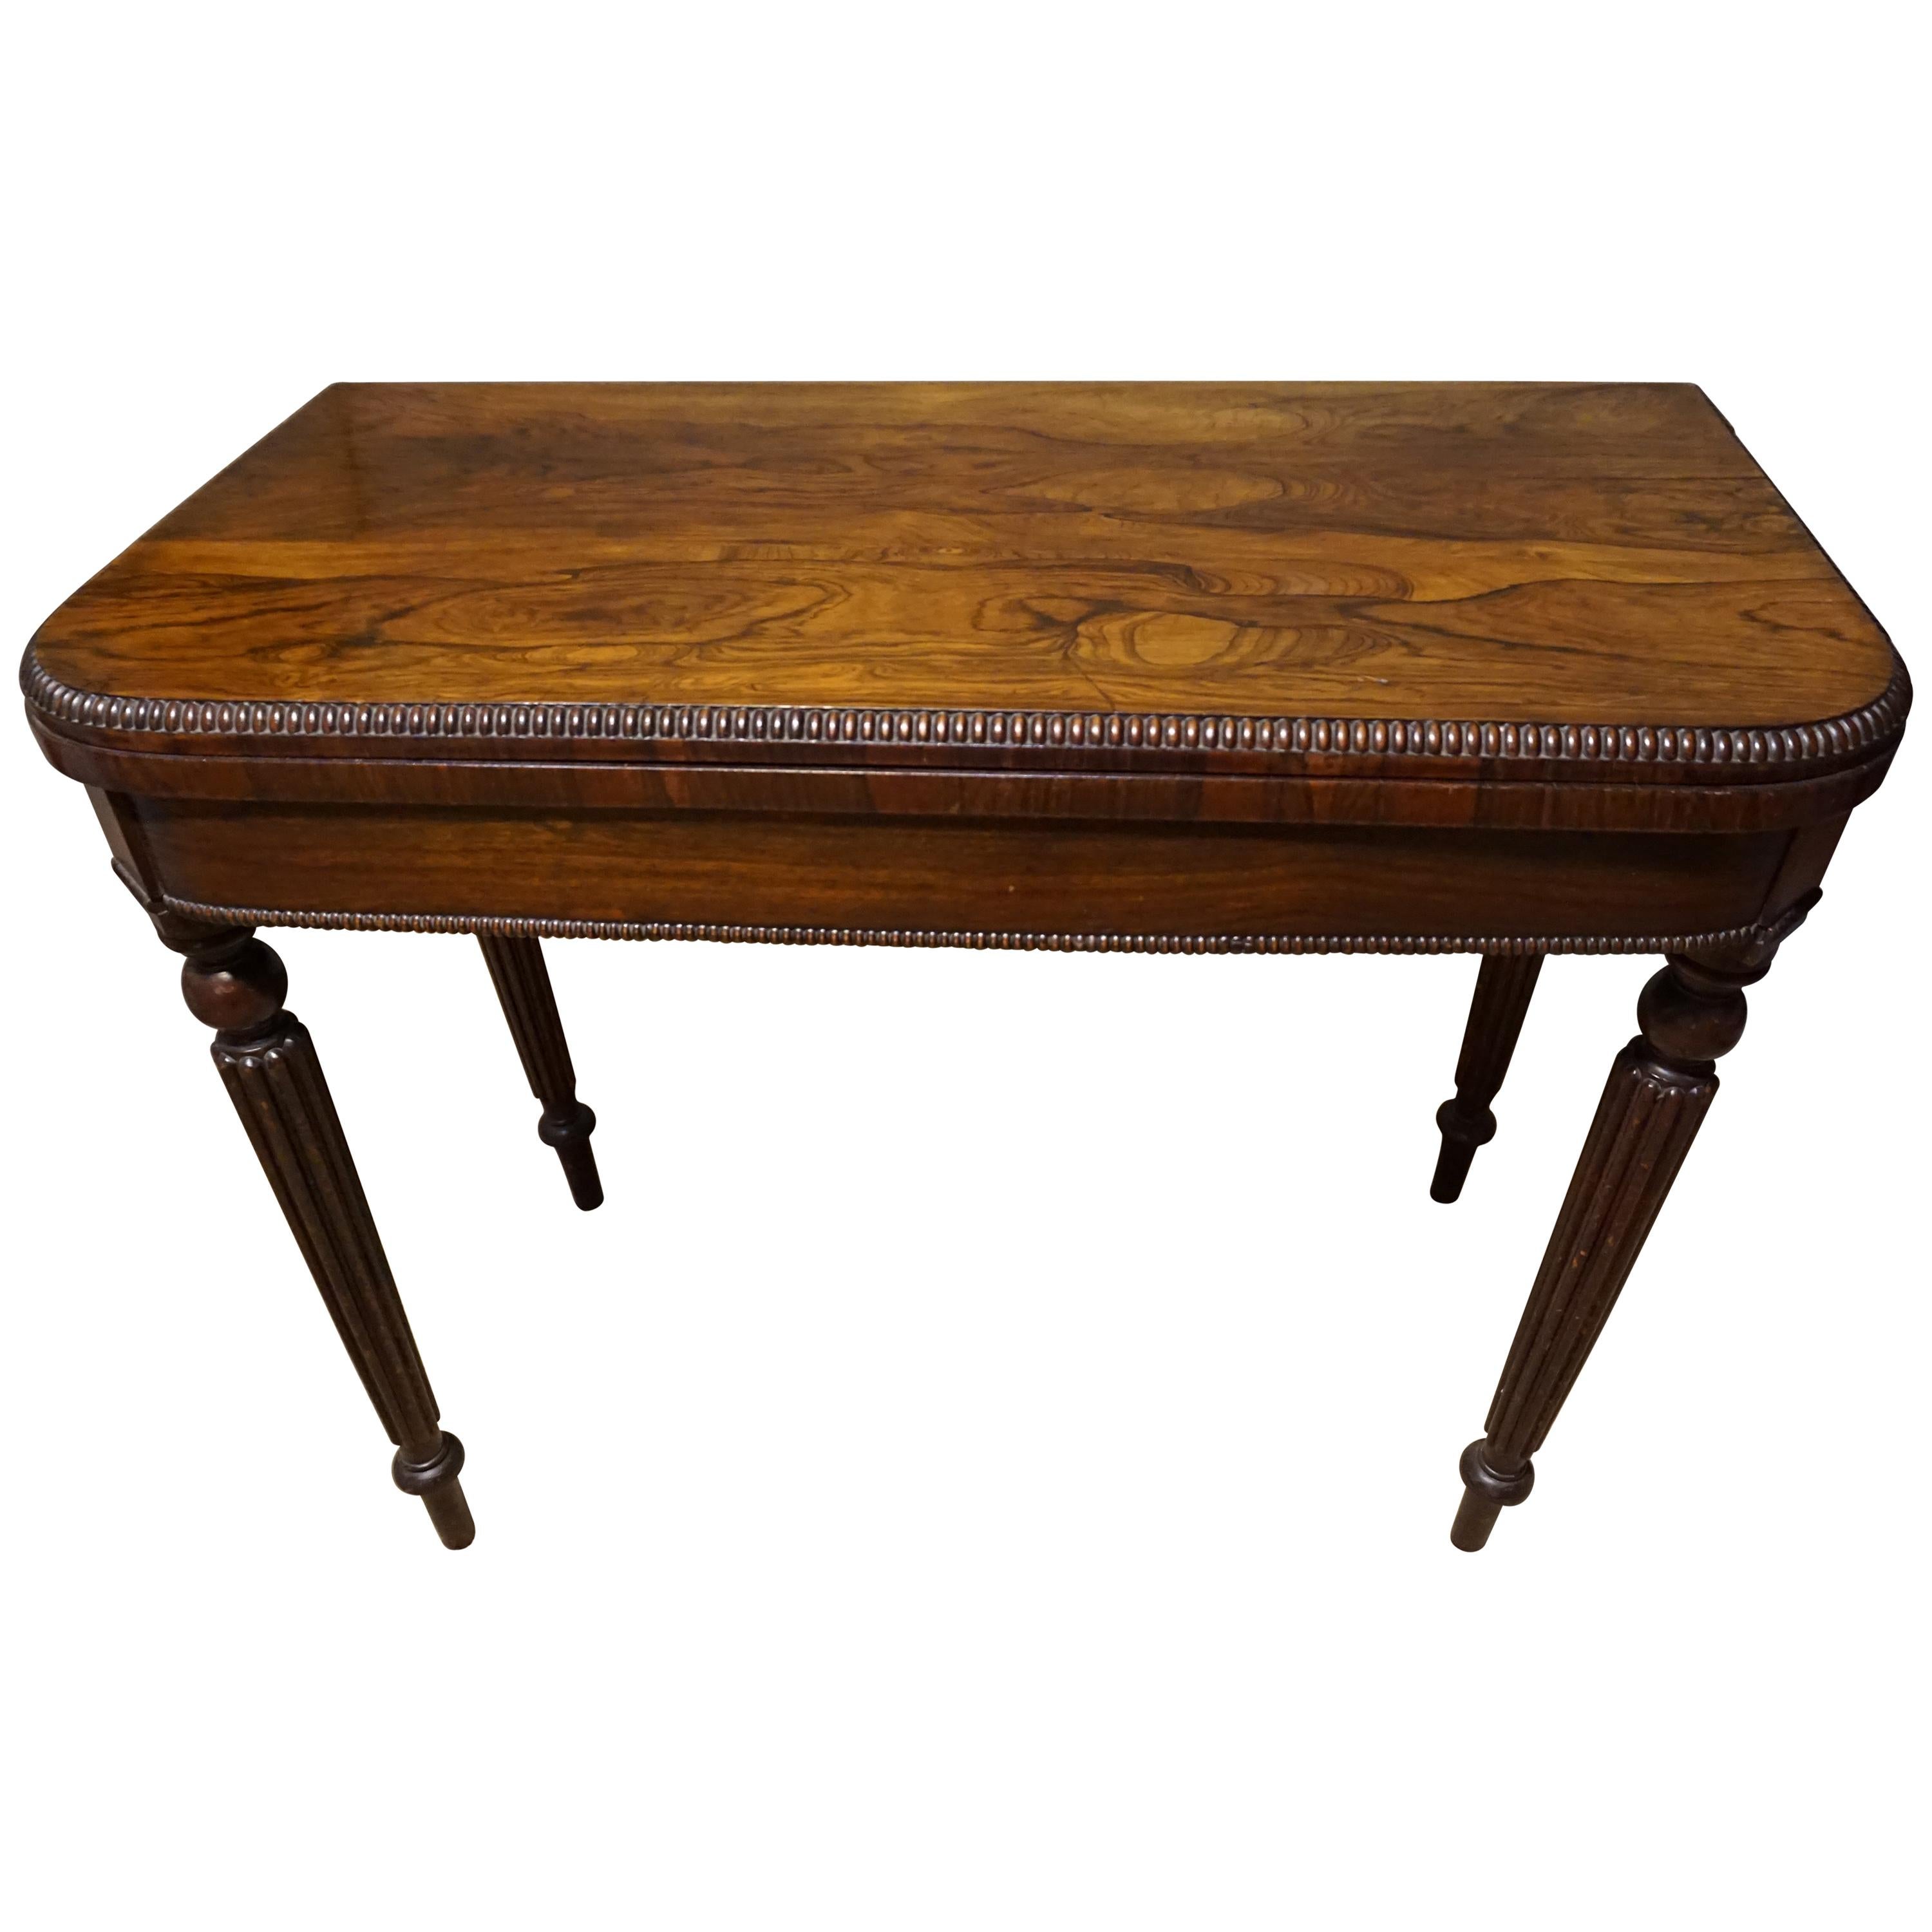 Victorian Rosewood Games Table with Carved Legs and Beaded Edge For Sale